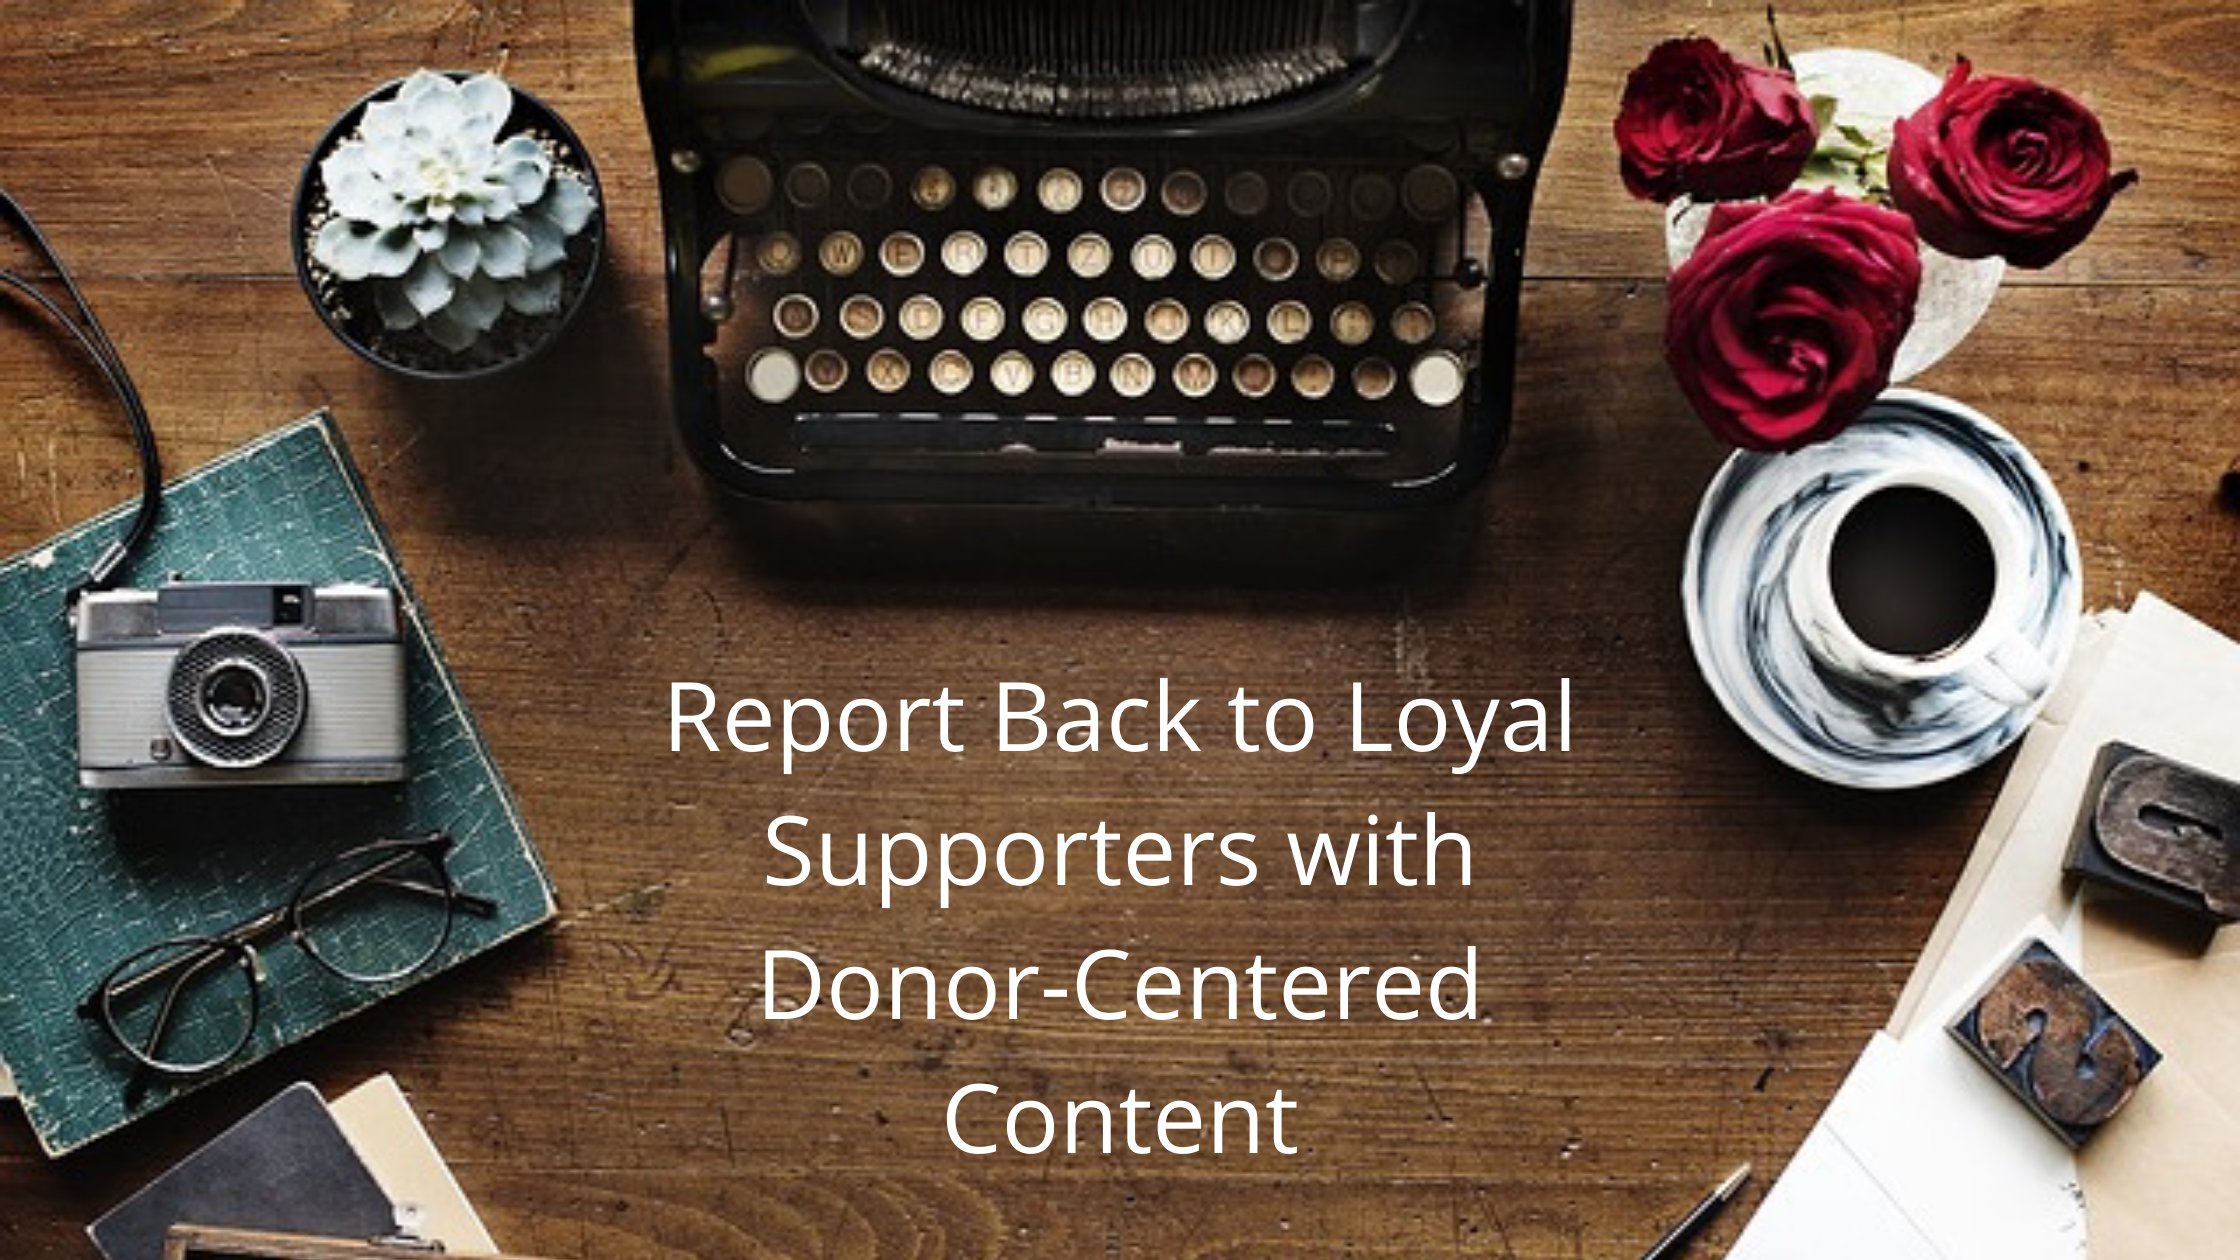 report back to loyal supporters with donor-centered content